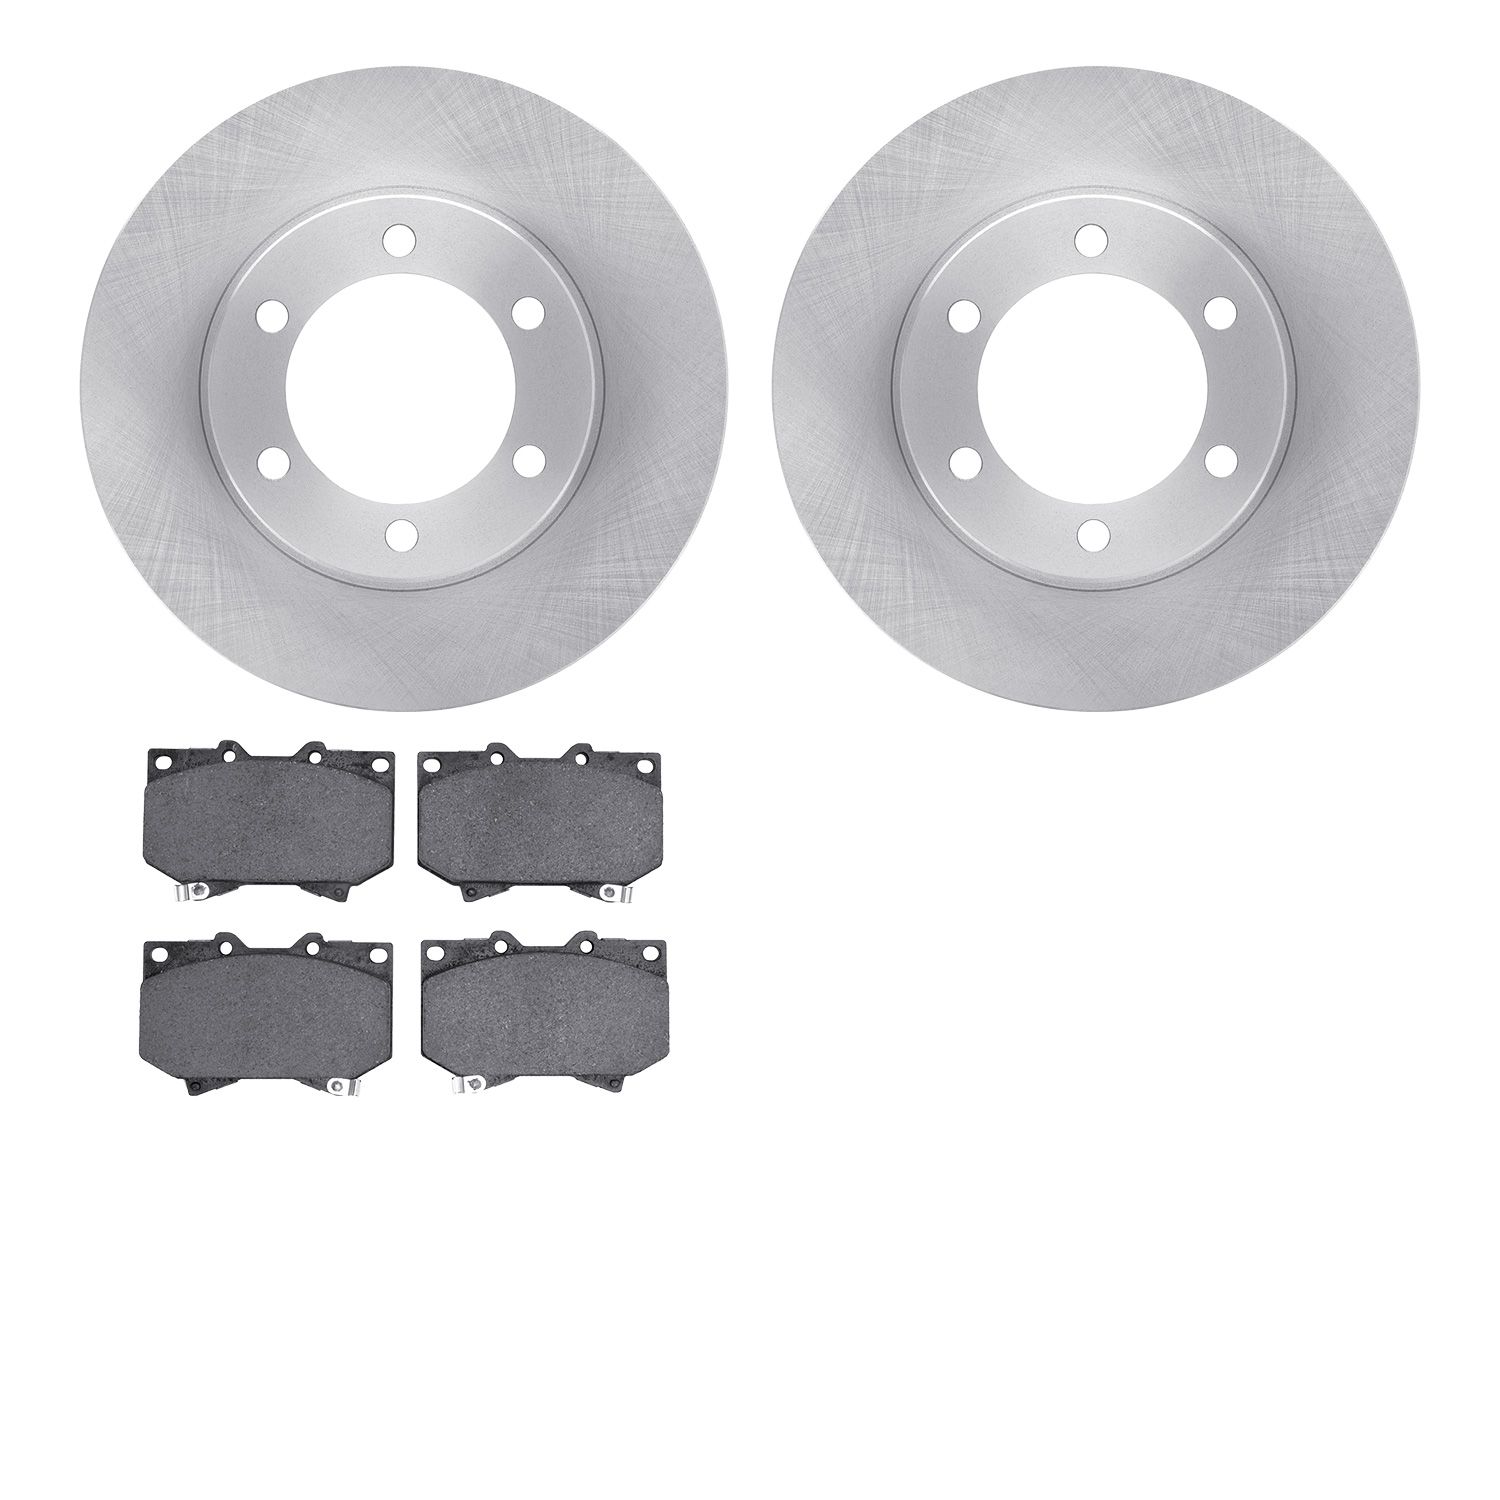 6402-76040 Brake Rotors with Ultimate-Duty Brake Pads, 2000-2002 Lexus/Toyota/Scion, Position: Front